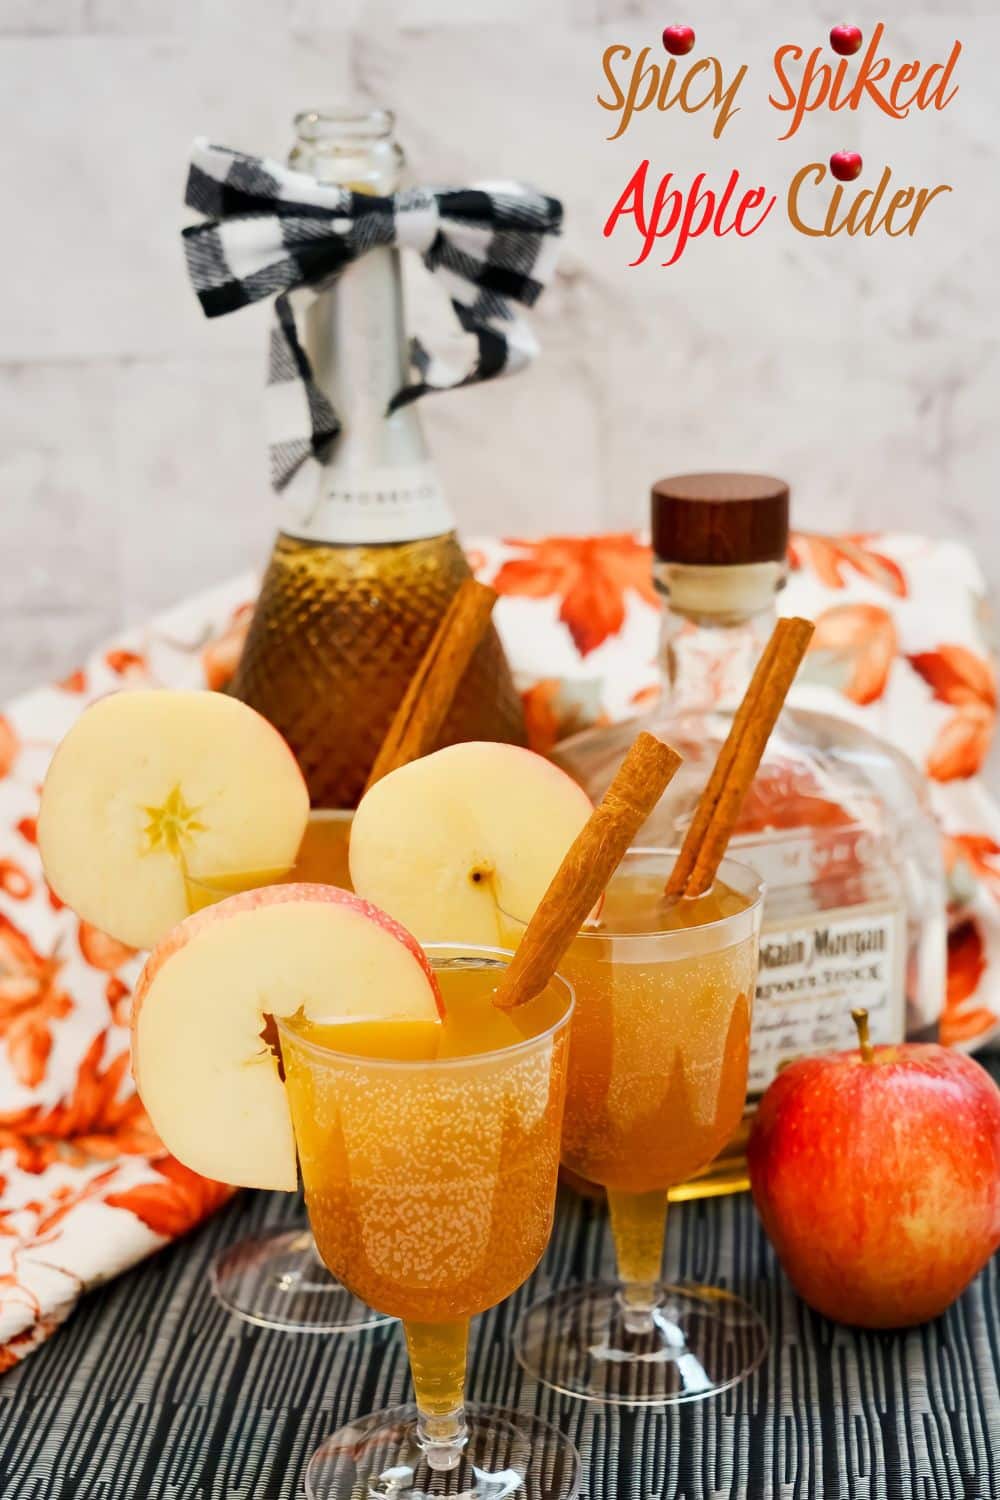 Sweet and Spicy Spiked Apple Cider Drink 1 1